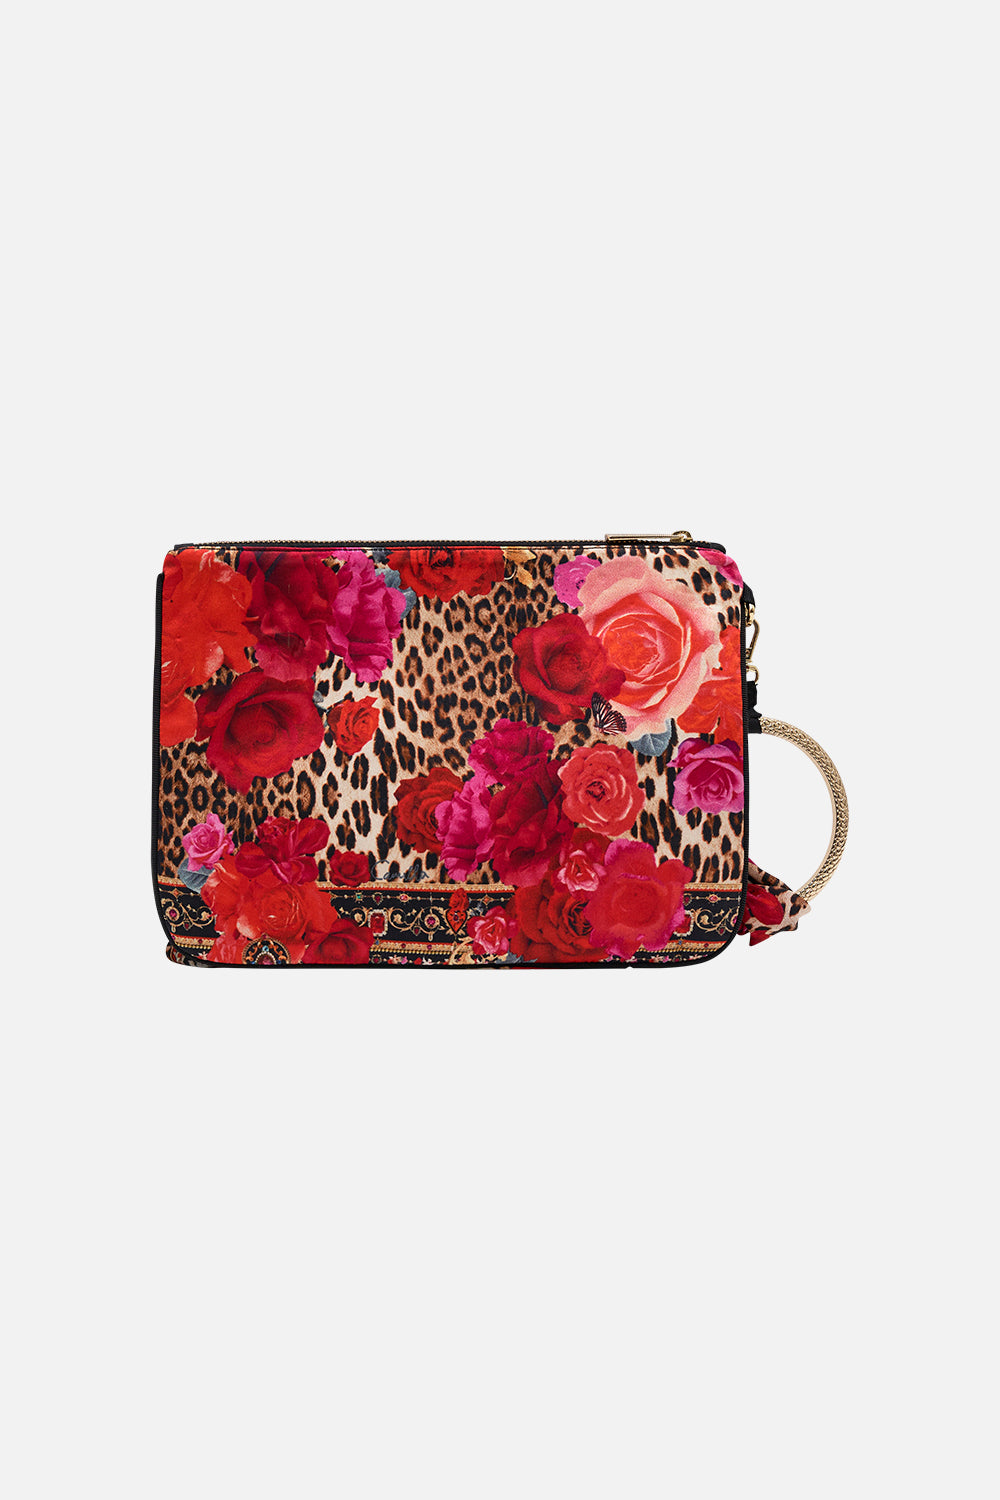 Product view of CAMILLA silk clutch bag in Heart Like A Wildflower print